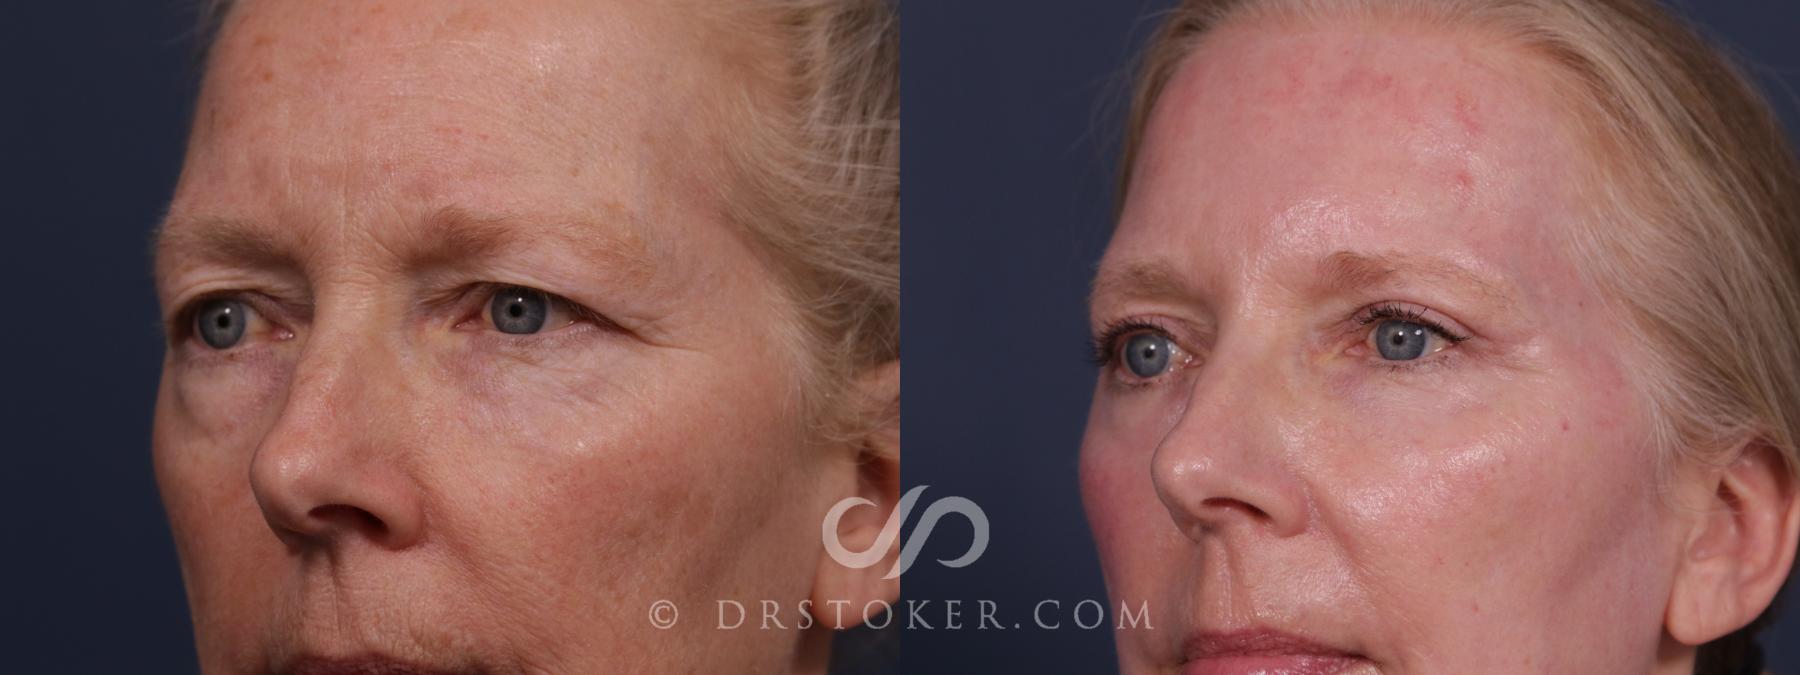 Before & After Eyelid Surgery Case 2190 Left Oblique View in Los Angeles, CA